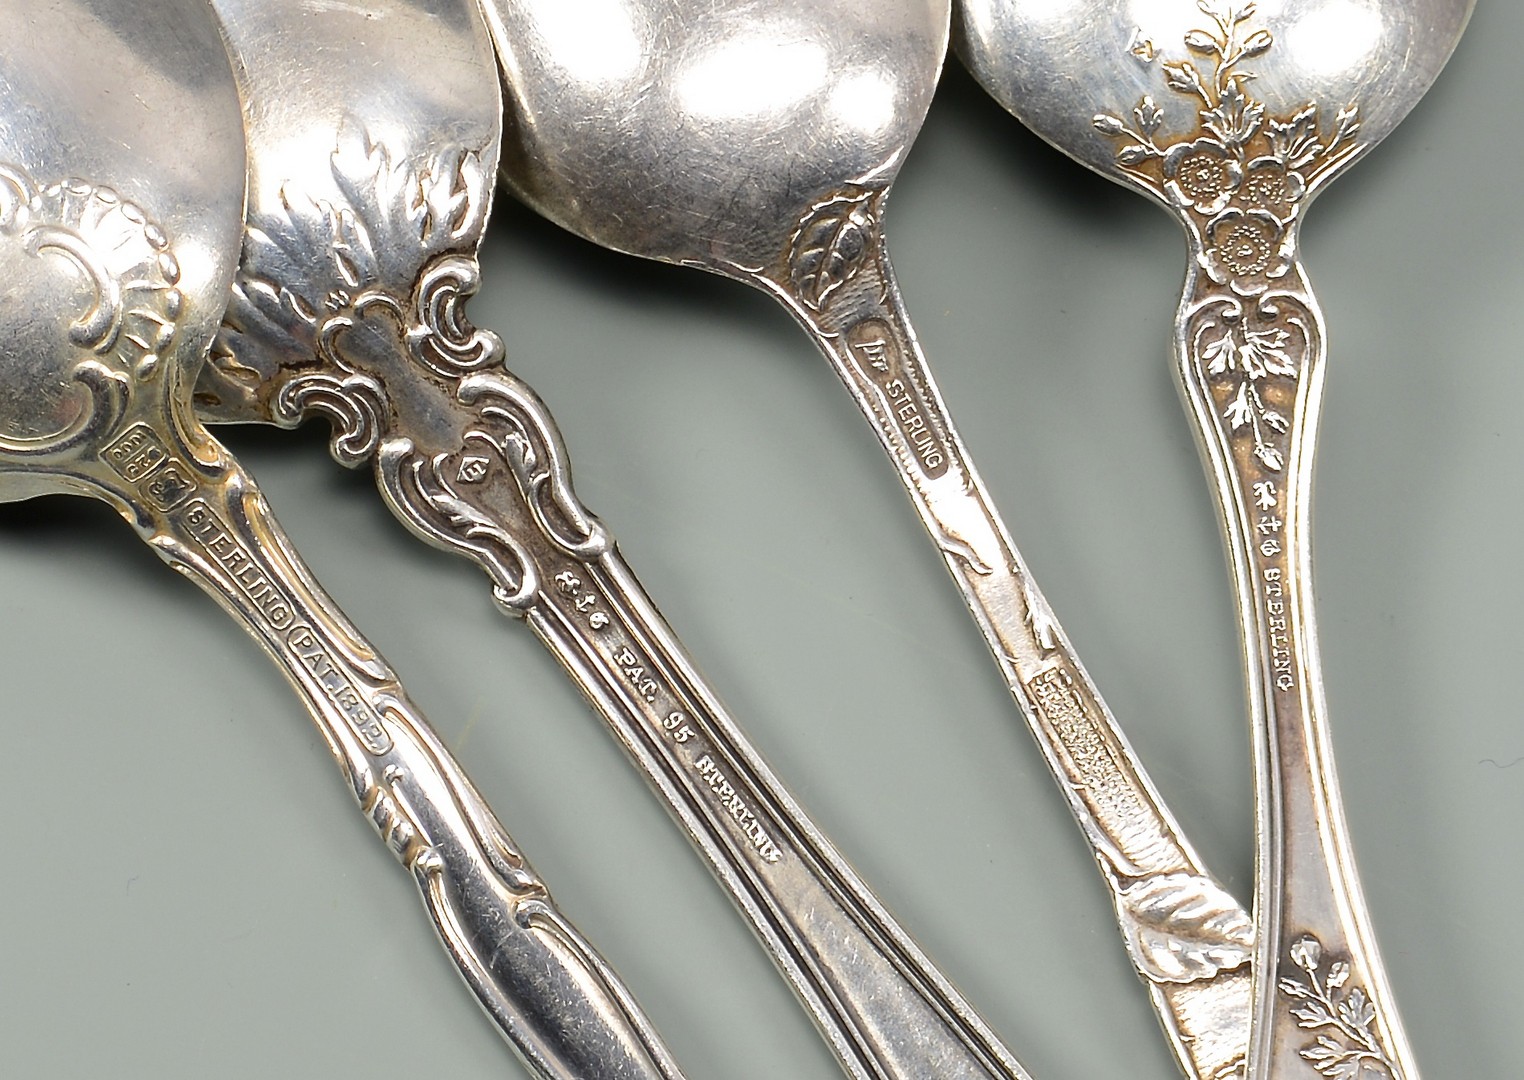 Lot 56: Tiffany Lap Edge Serving Spoon plus other sterling